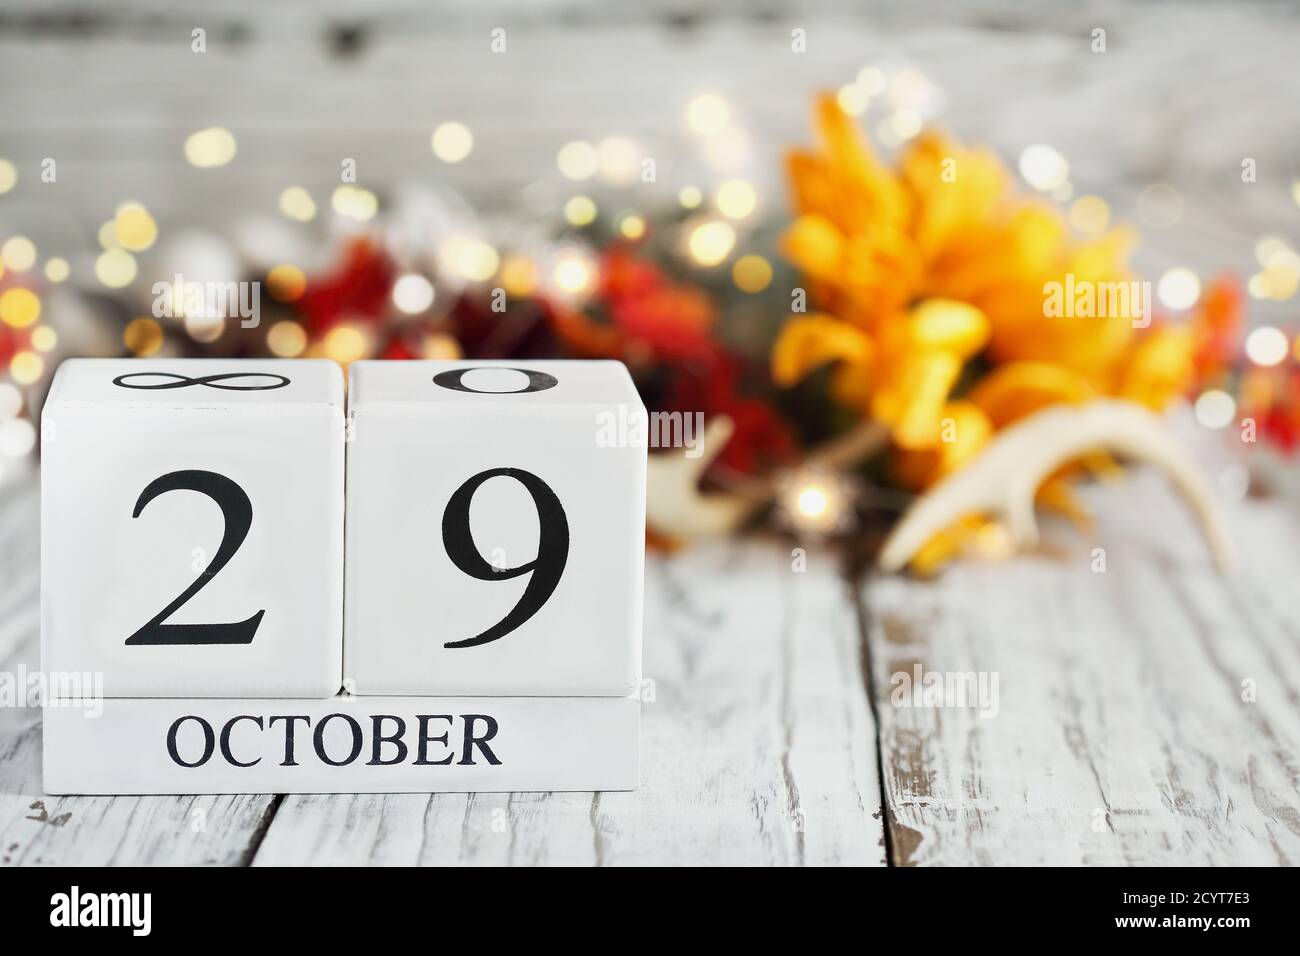 White wood calendar blocks with the date October 29th and autumn decorations over a wooden table. Selective focus with blurred background. Stock Photo